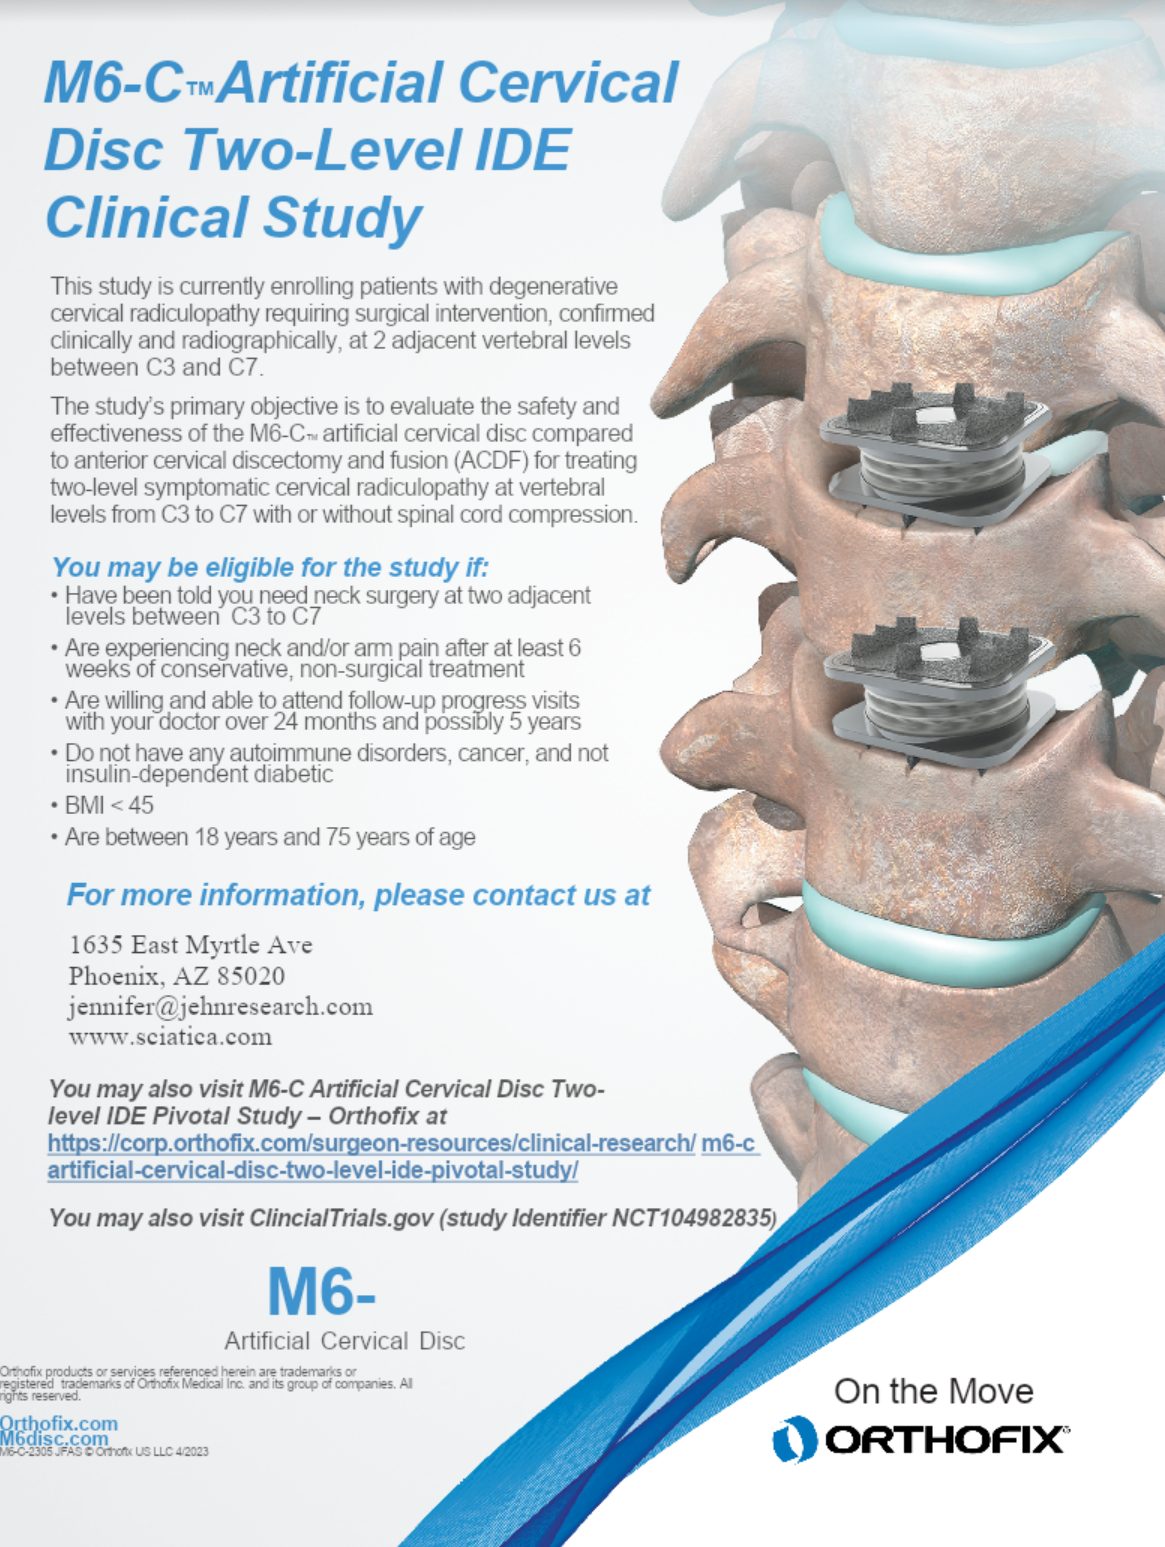 M6-C Artificial Cervical DISC Two-Level IDE Clinical Study